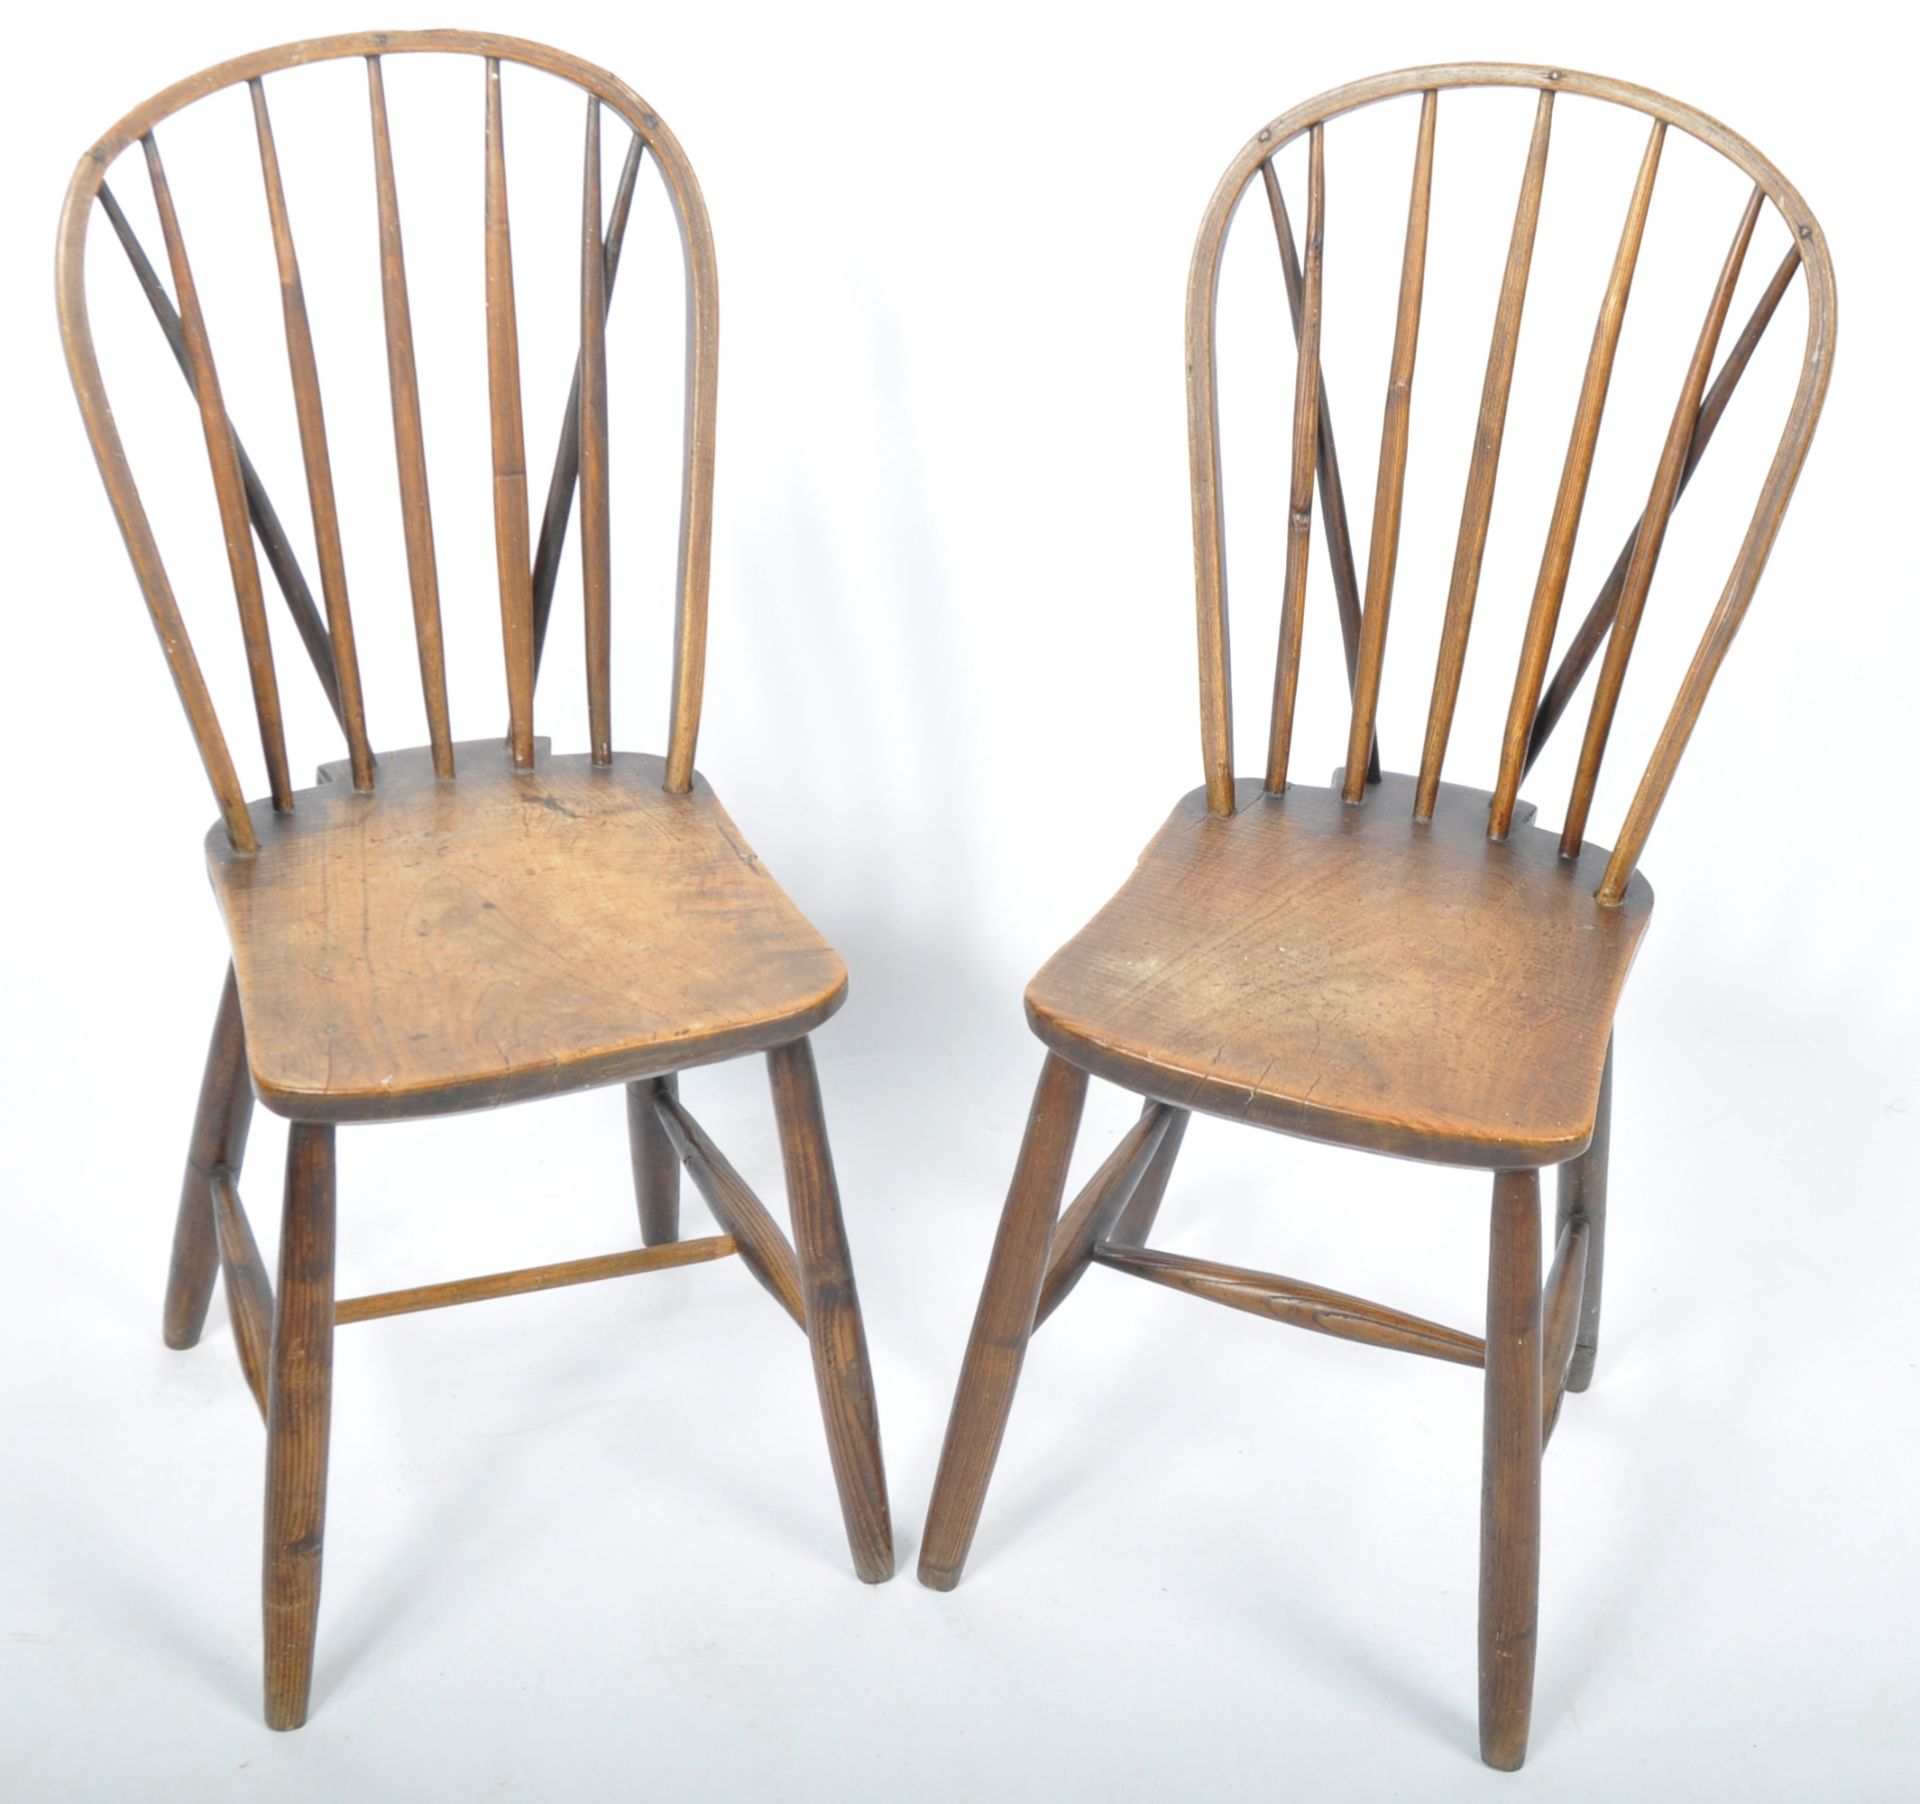 PAIR OF 19TH CENTURY BEECH AND ELM WINDSOR DINING CHAIRS